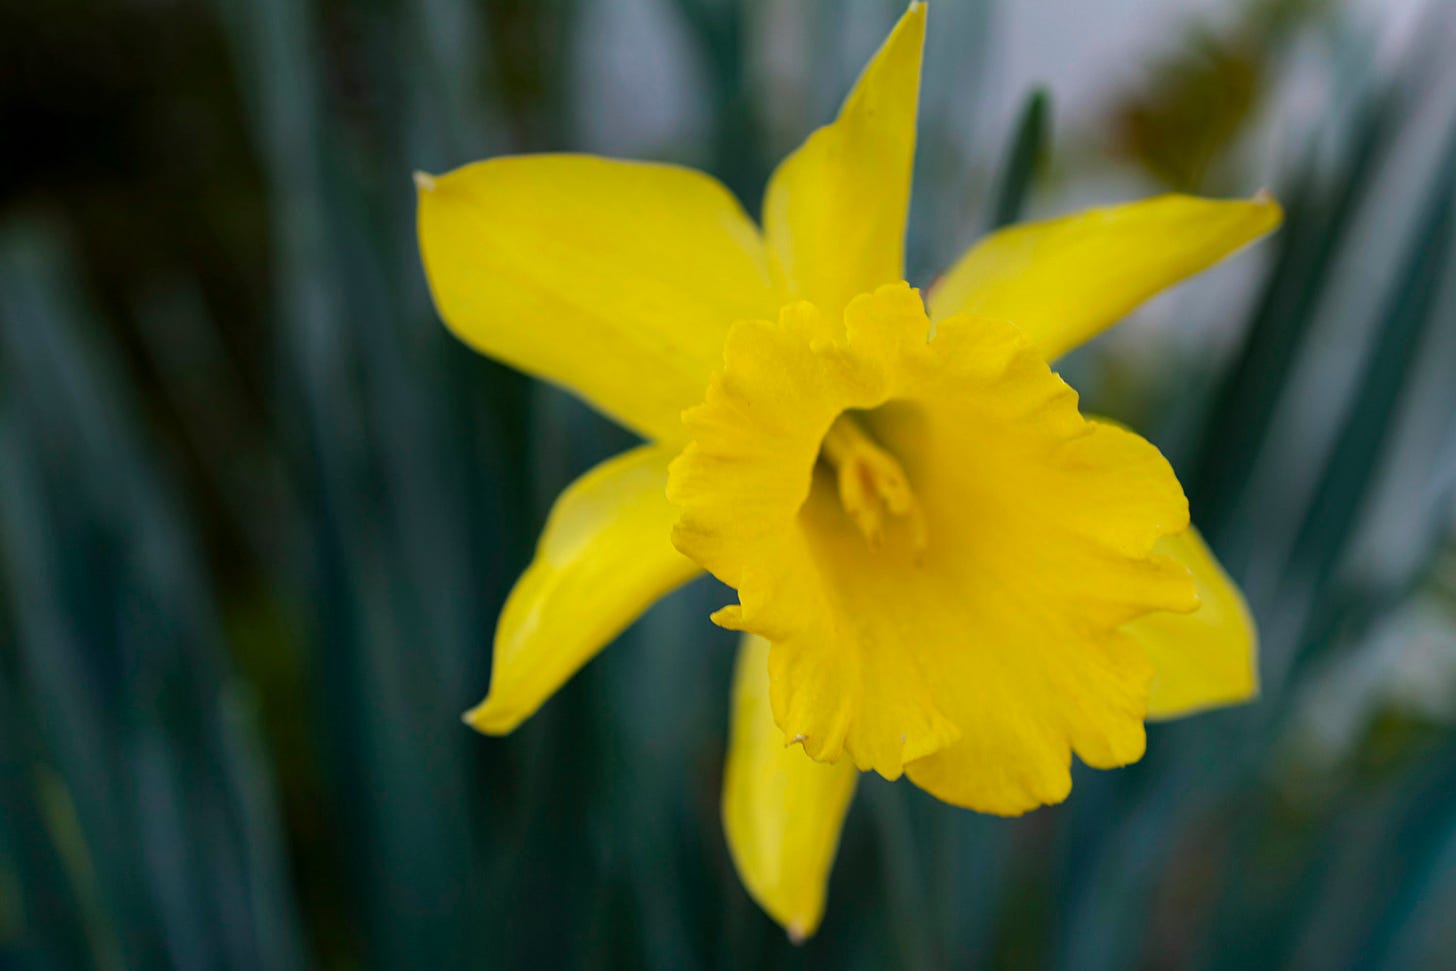 A single yellow daffodil in the foreground with a blurred background 